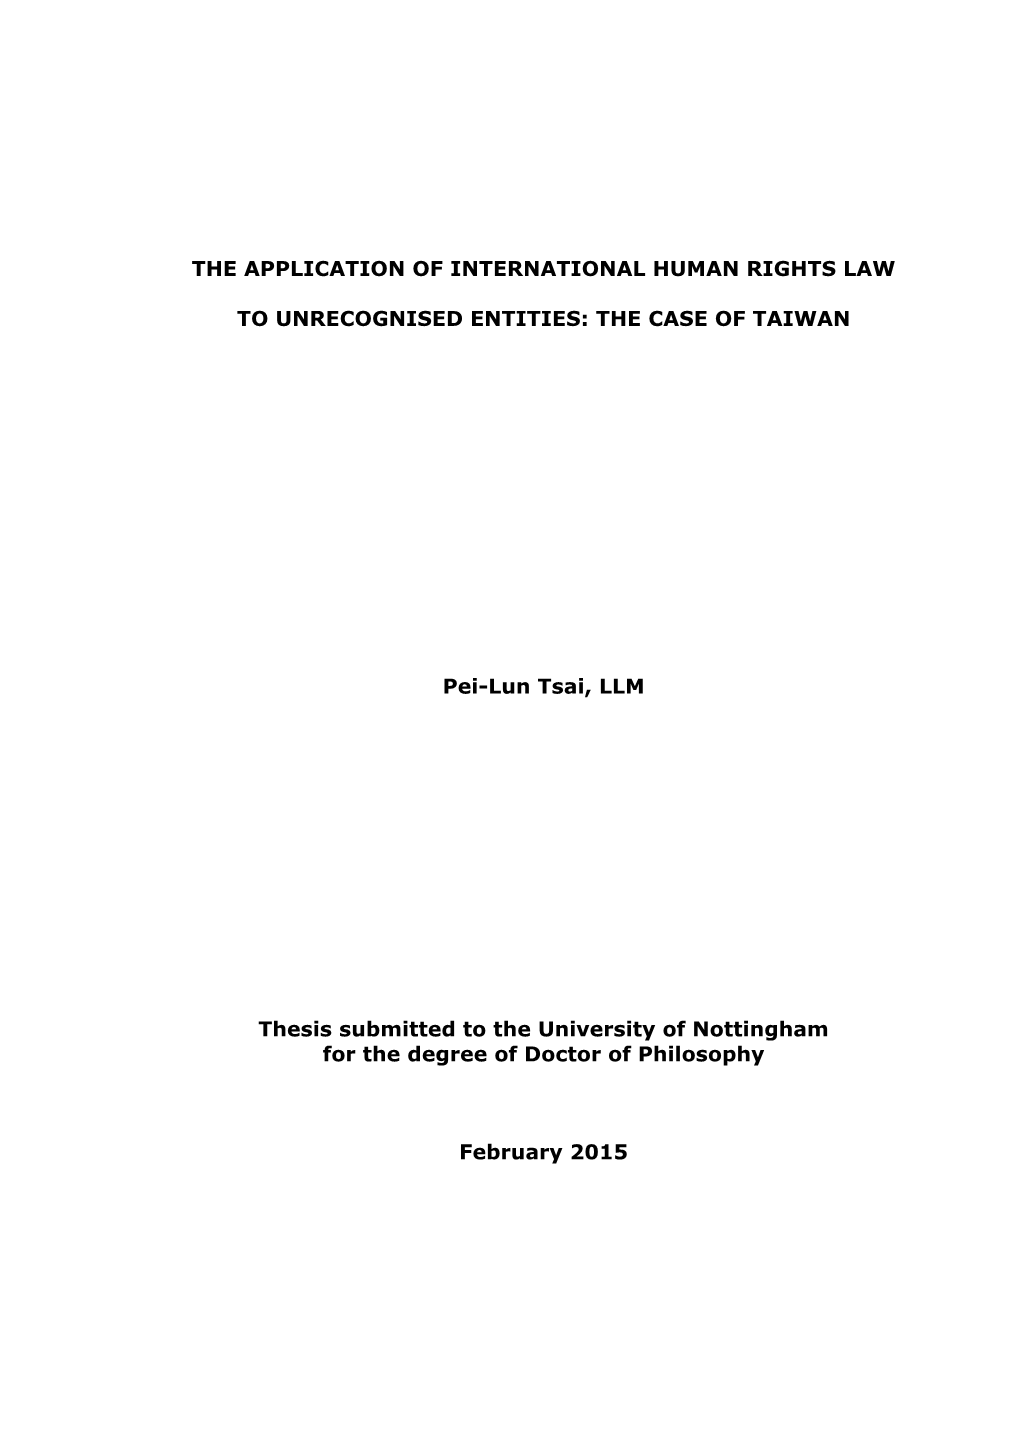 THE APPLICATION of INTERNATIONAL HUMAN RIGHTS LAW to UNRECOGNISED ENTITIES: the CASE of TAIWAN Pei-Lun Tsai, LLM Thesis Submitt